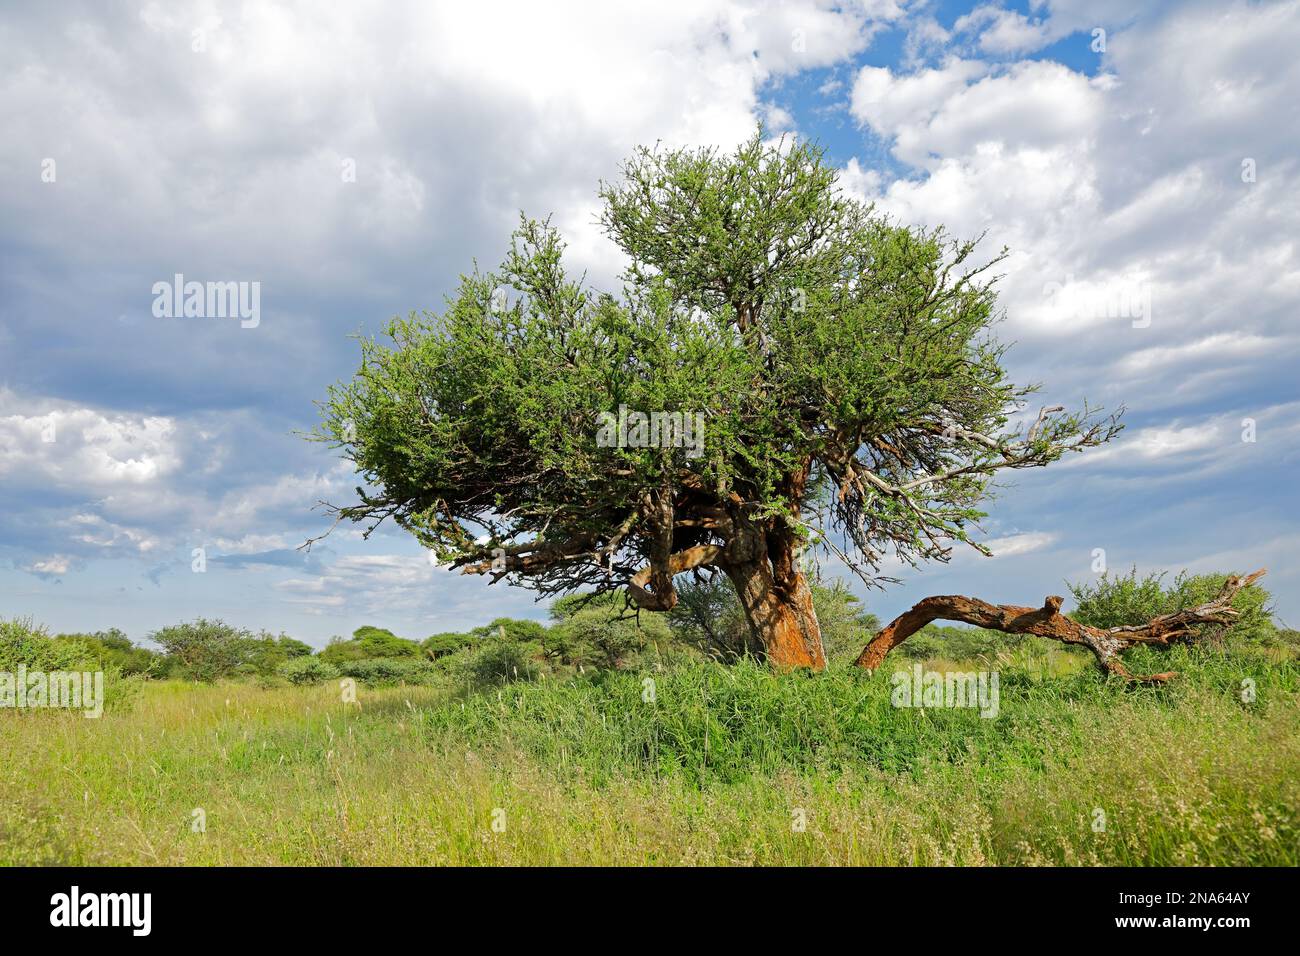 African shepherds tree (Boscia albitrunca) in grassland against a cloudy sky, South Africa Stock Photo